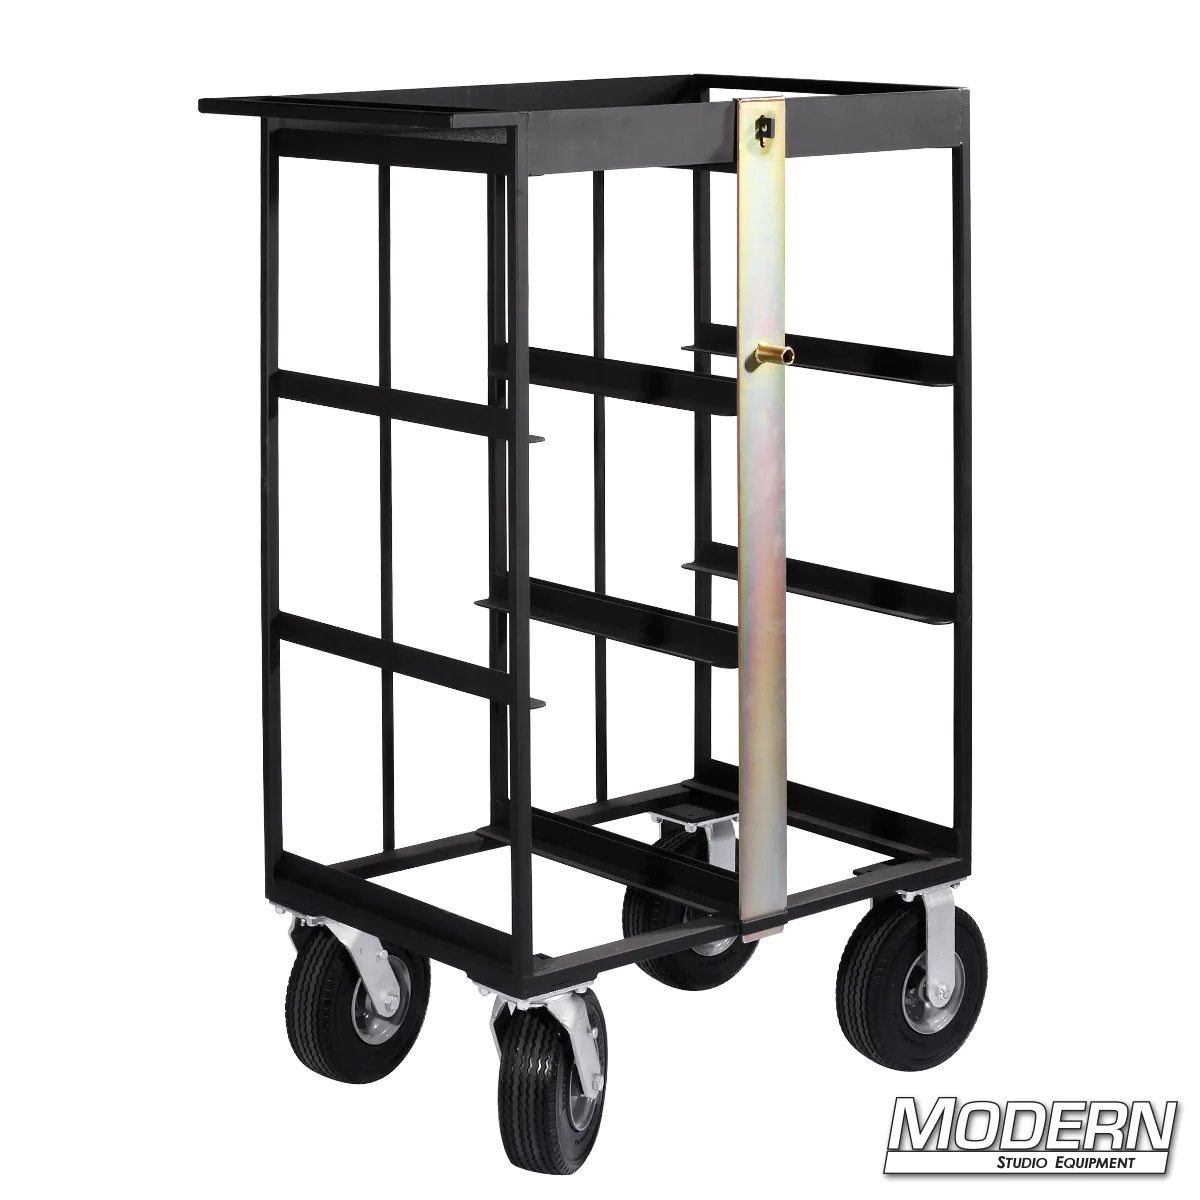 6 Place Milk Crate Cart Complete with Locking Bar - Without Crates